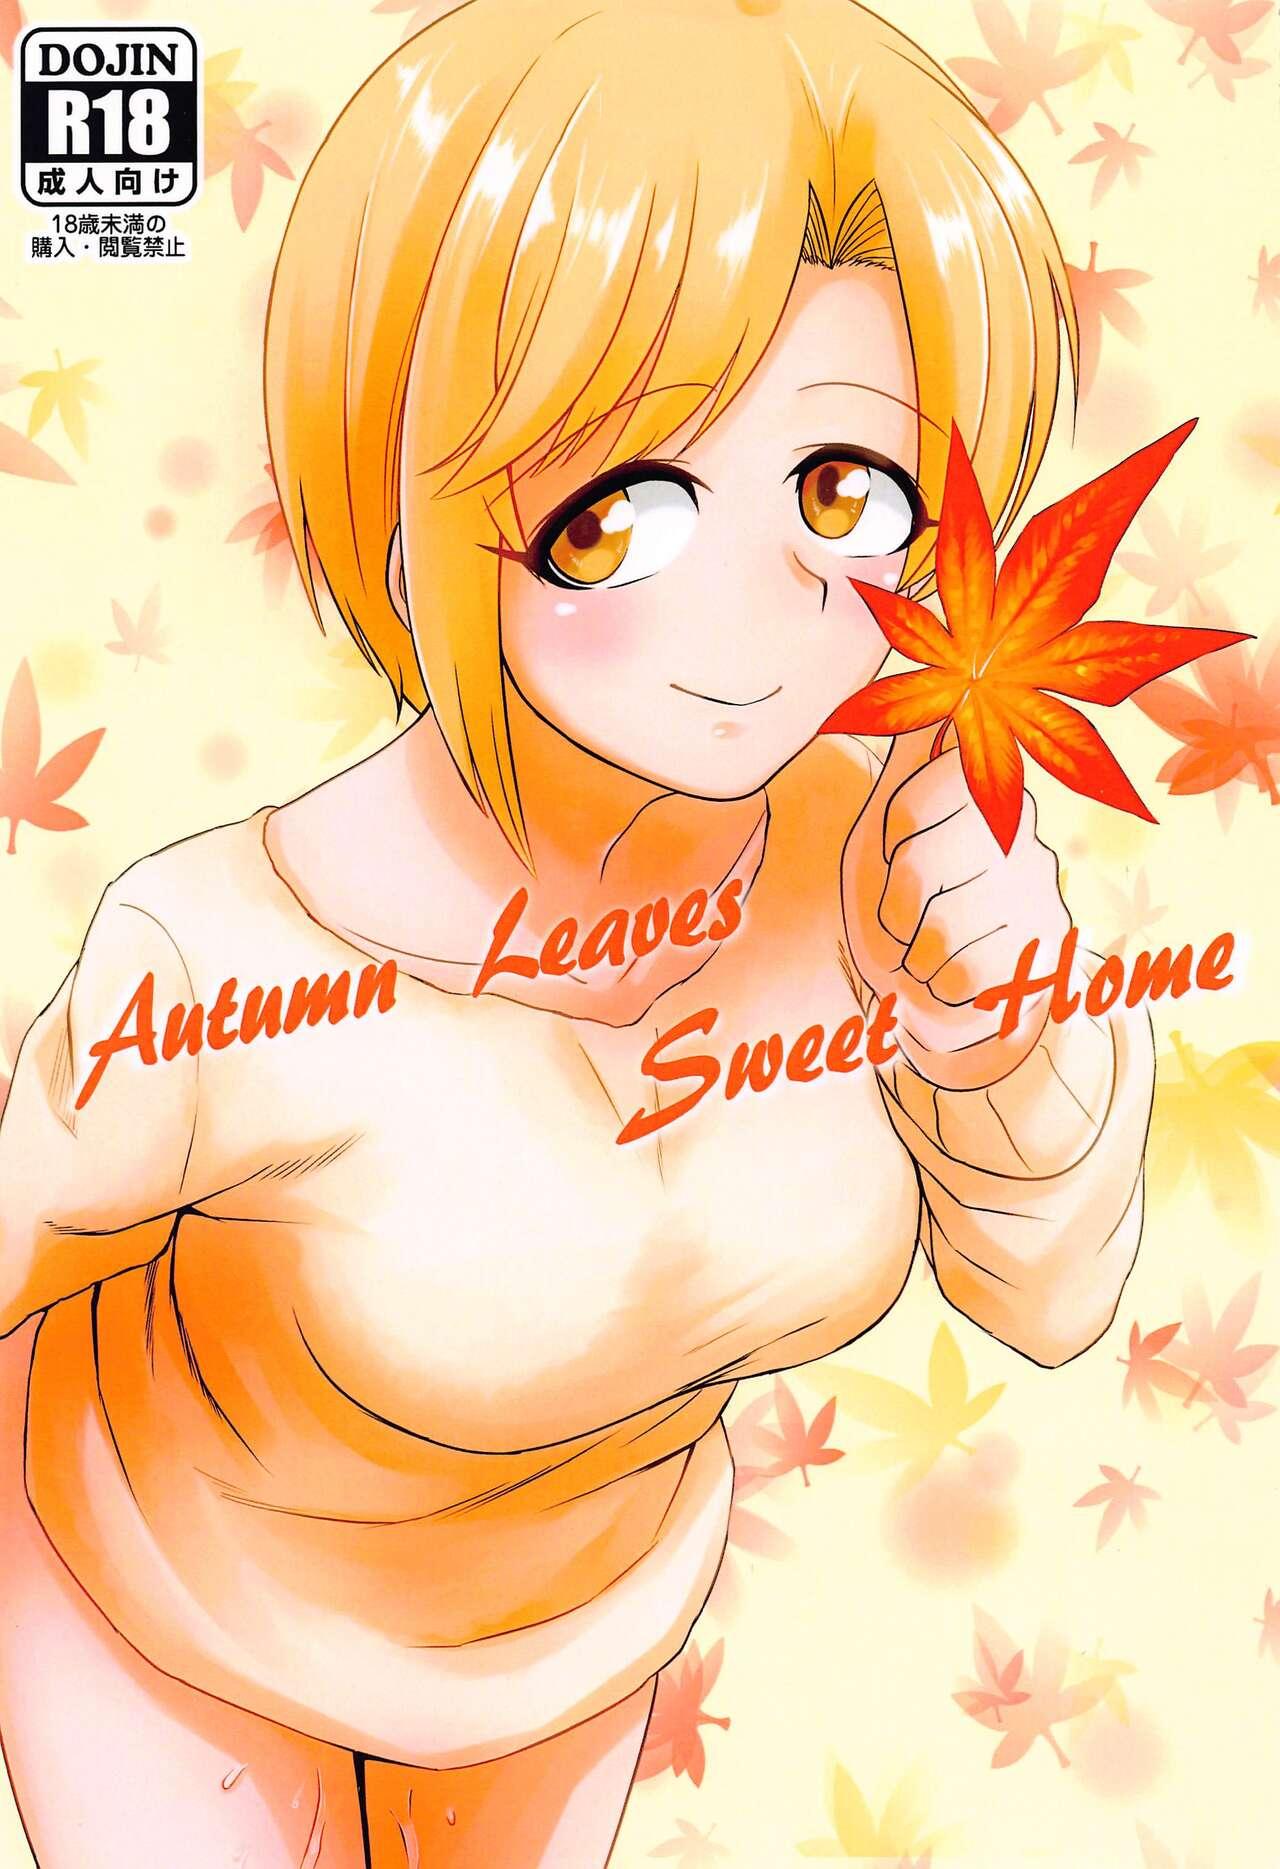 Mofos Autumn Leaves Sweet Home - The idolmaster Collar - Picture 1